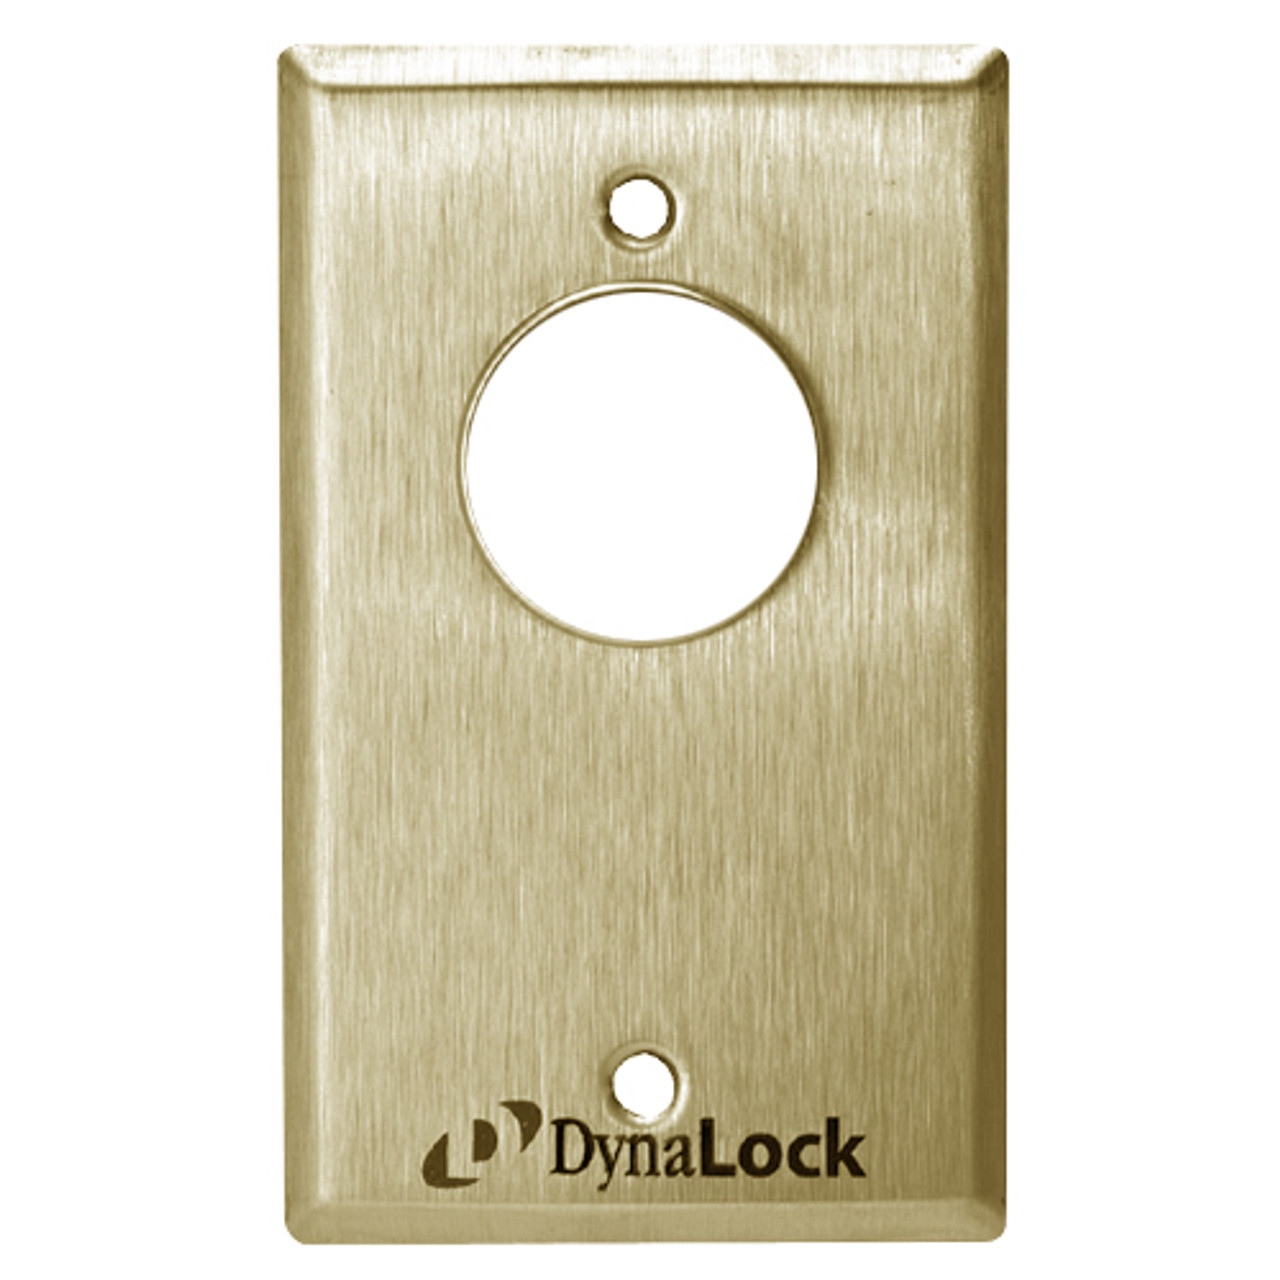 7024-US4-ATS DynaLock 7000 Series Keyswitches Momentary 2 Double Pole Double Throw with Anti-Tamper Switch in Satin Brass